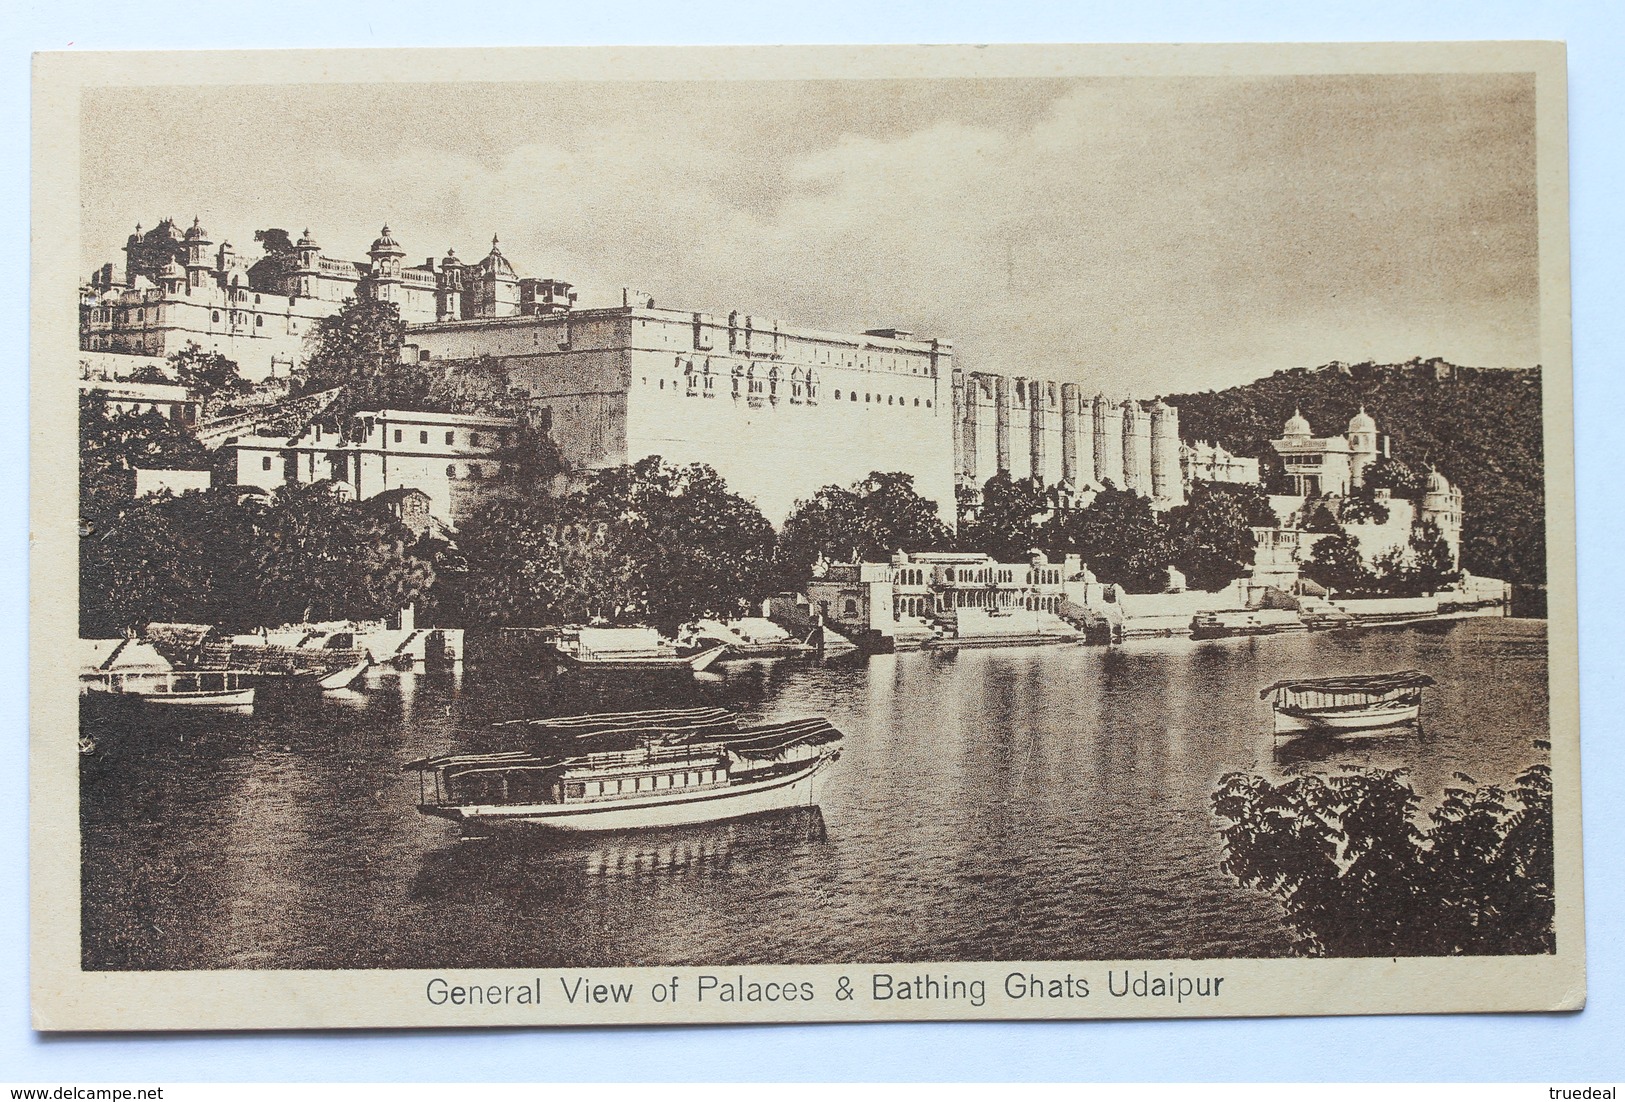 General View Of Palaces & Bathing Ghats, Udaipur, Rajasthan, India - India